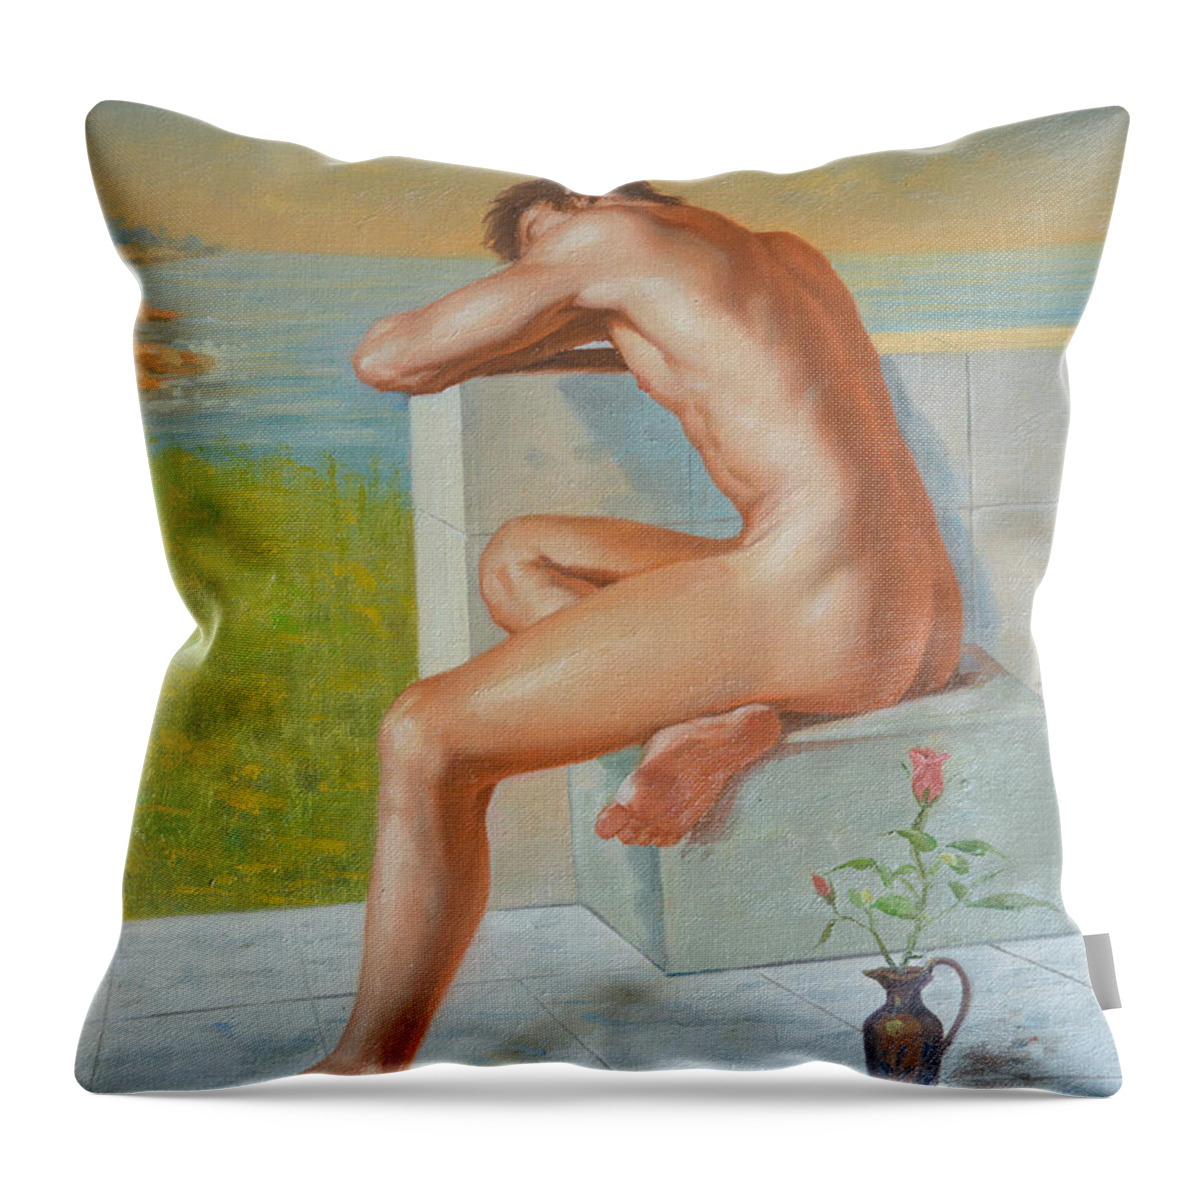 Original Throw Pillow featuring the painting Original Classic Oil Painting Man Body Art Male Nude And Vase #16-2-4-09 by Hongtao Huang